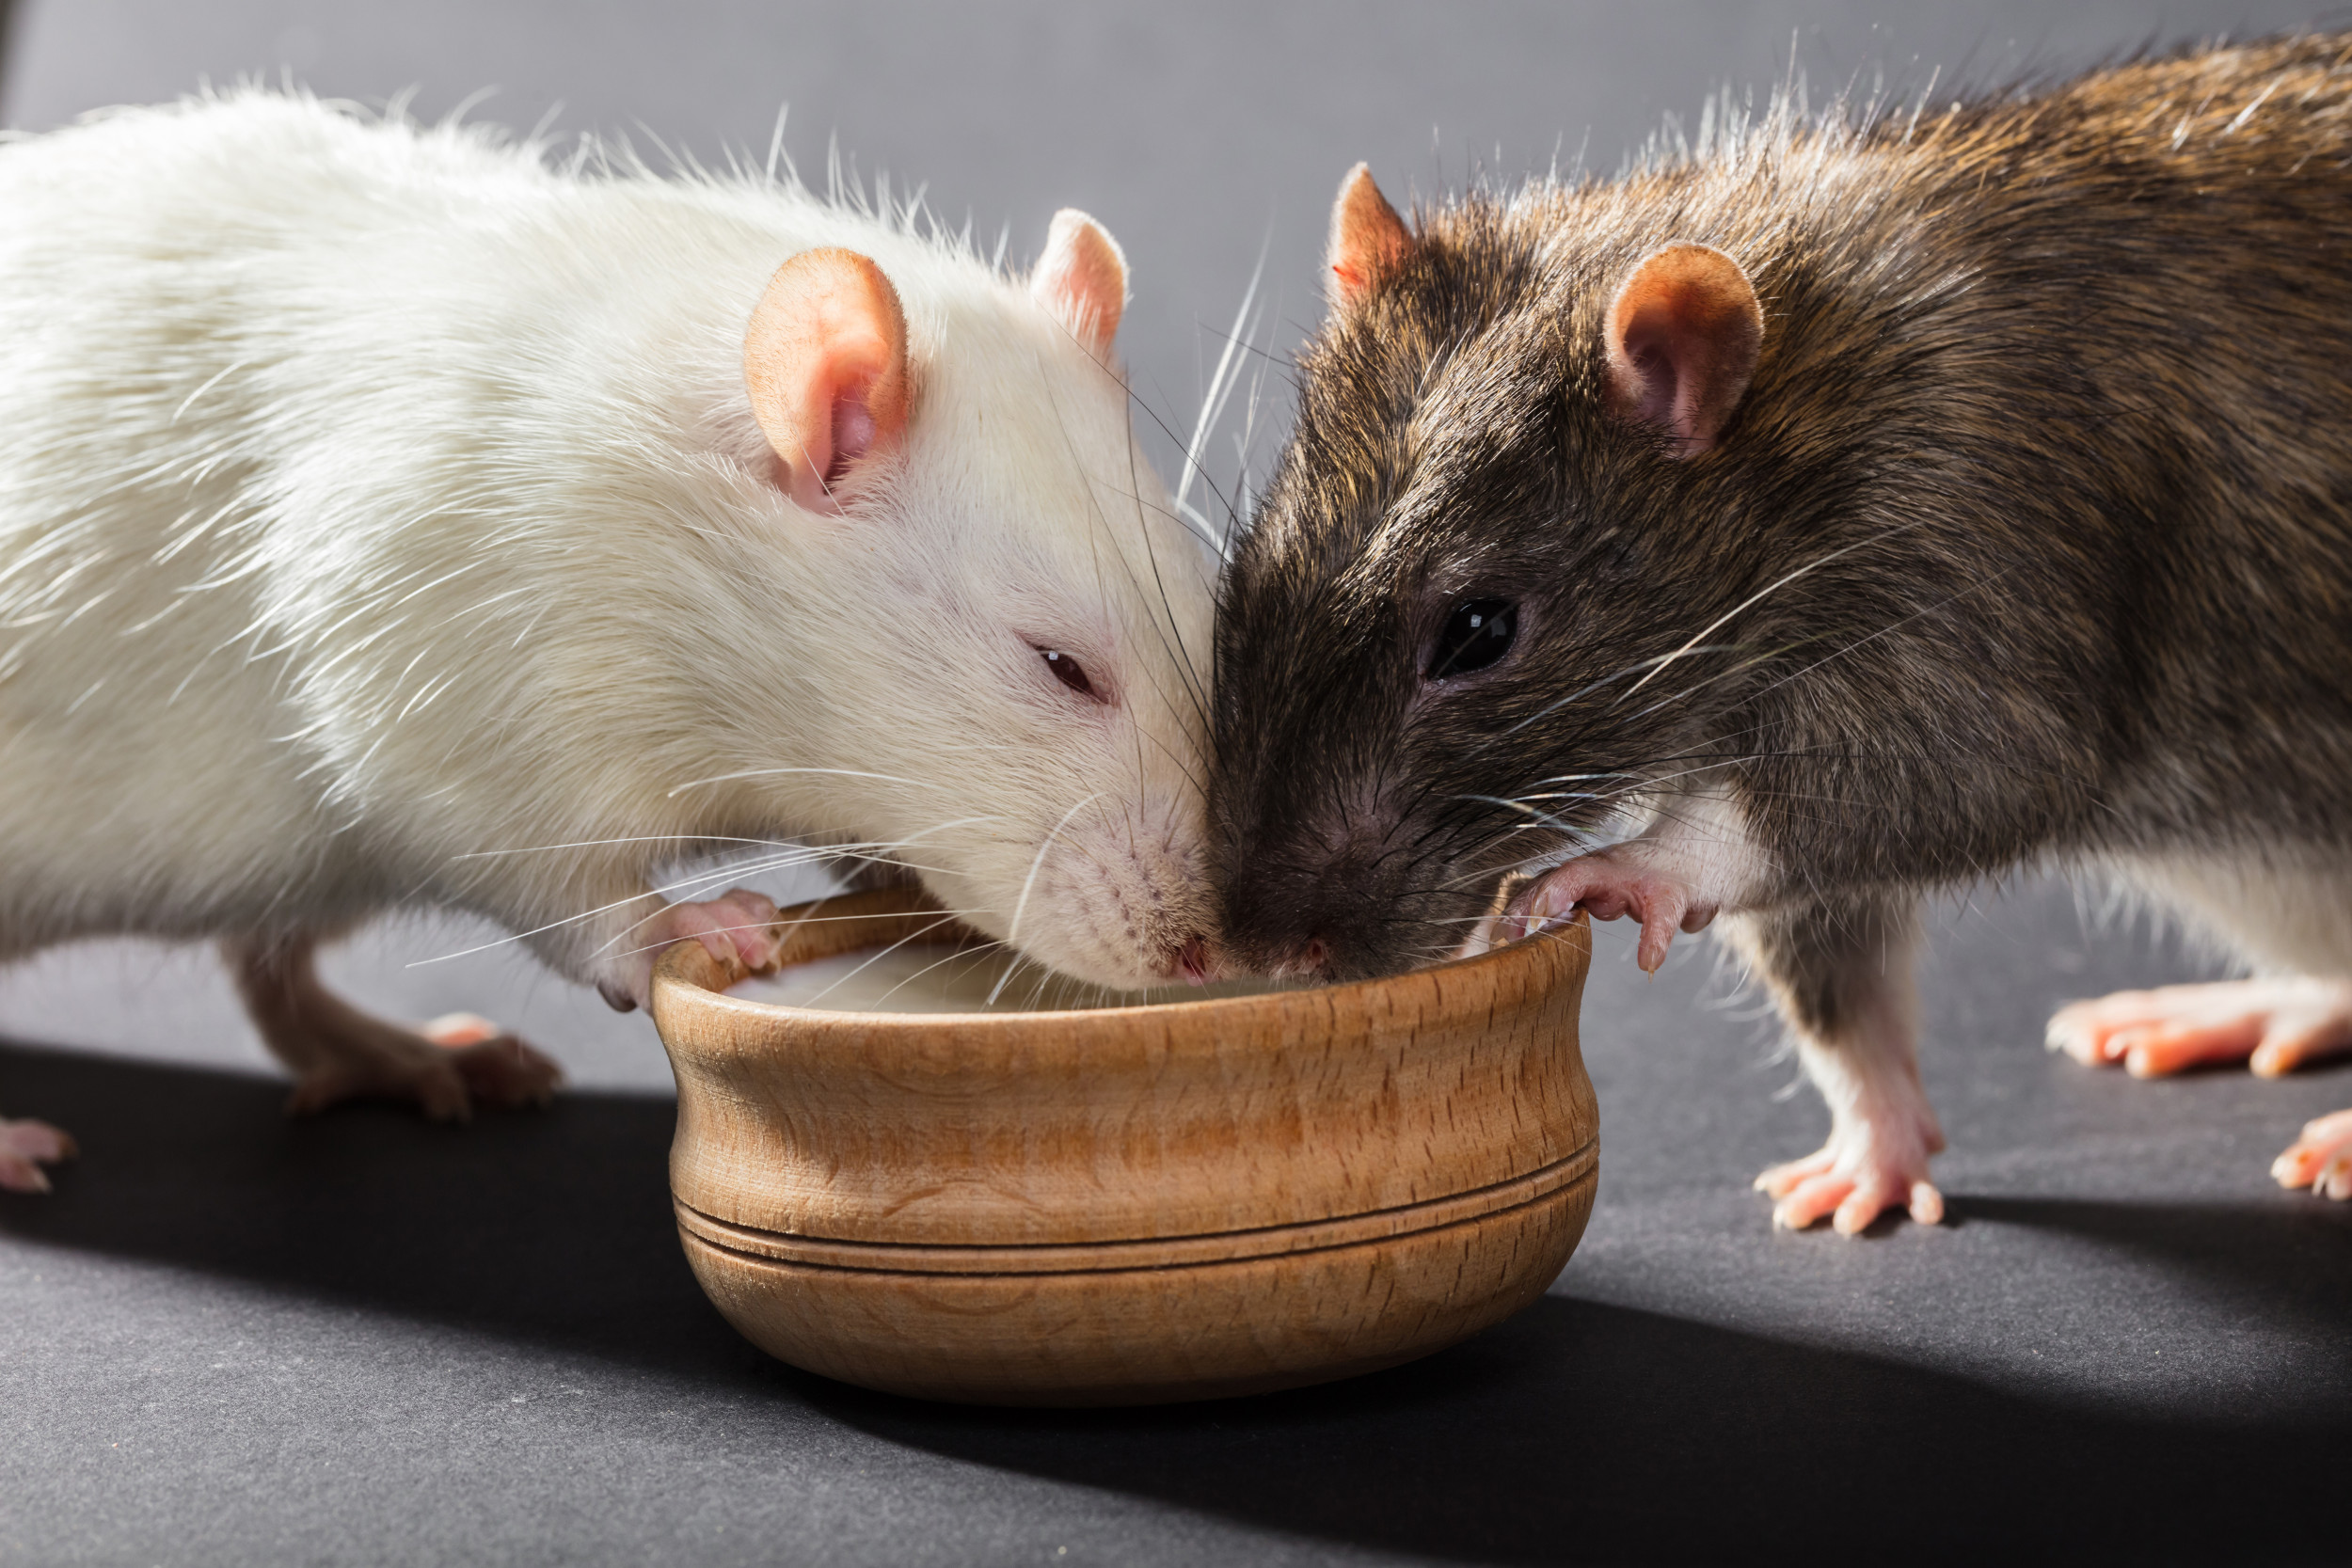 Rats Sniff Out Hunger and Share Food With Each Other Based On Need, Study  Finds